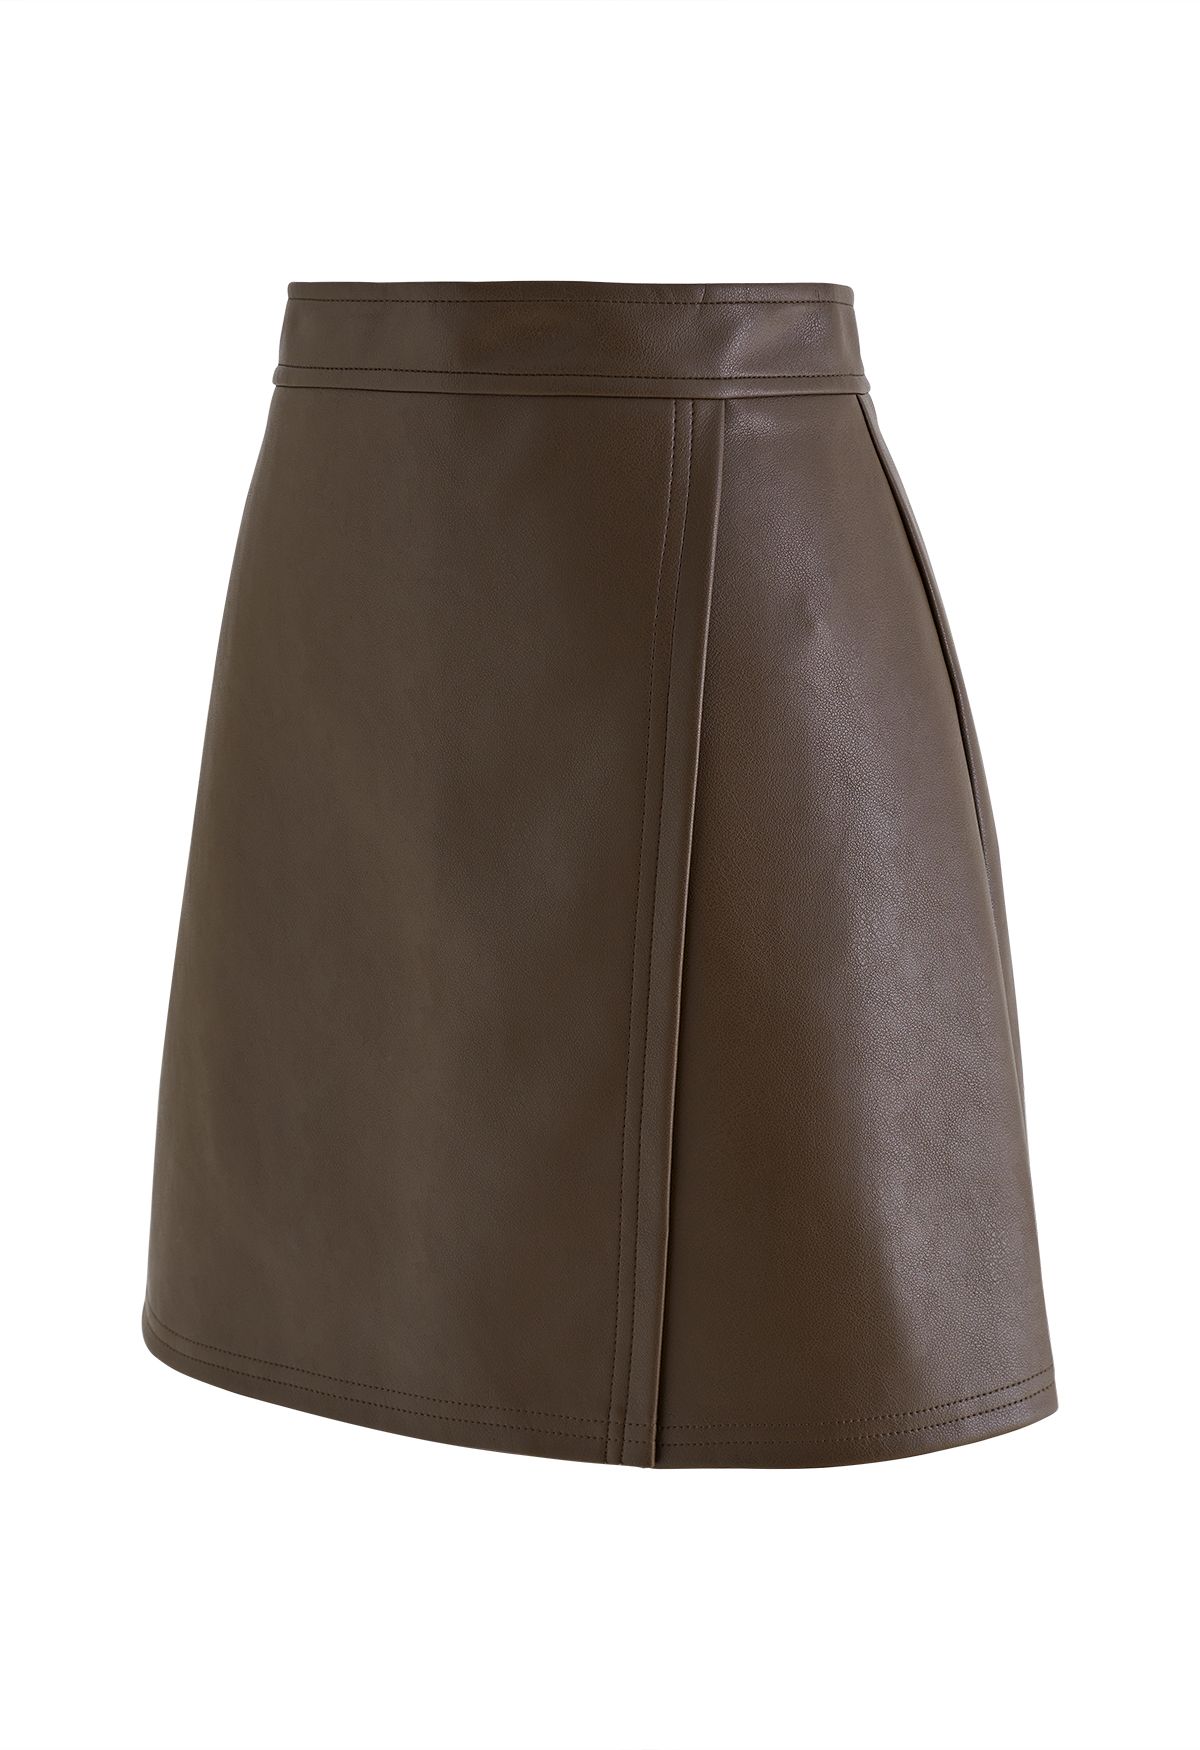 Nifty Faux Leather Flap Mini Bud Skirt in Brown